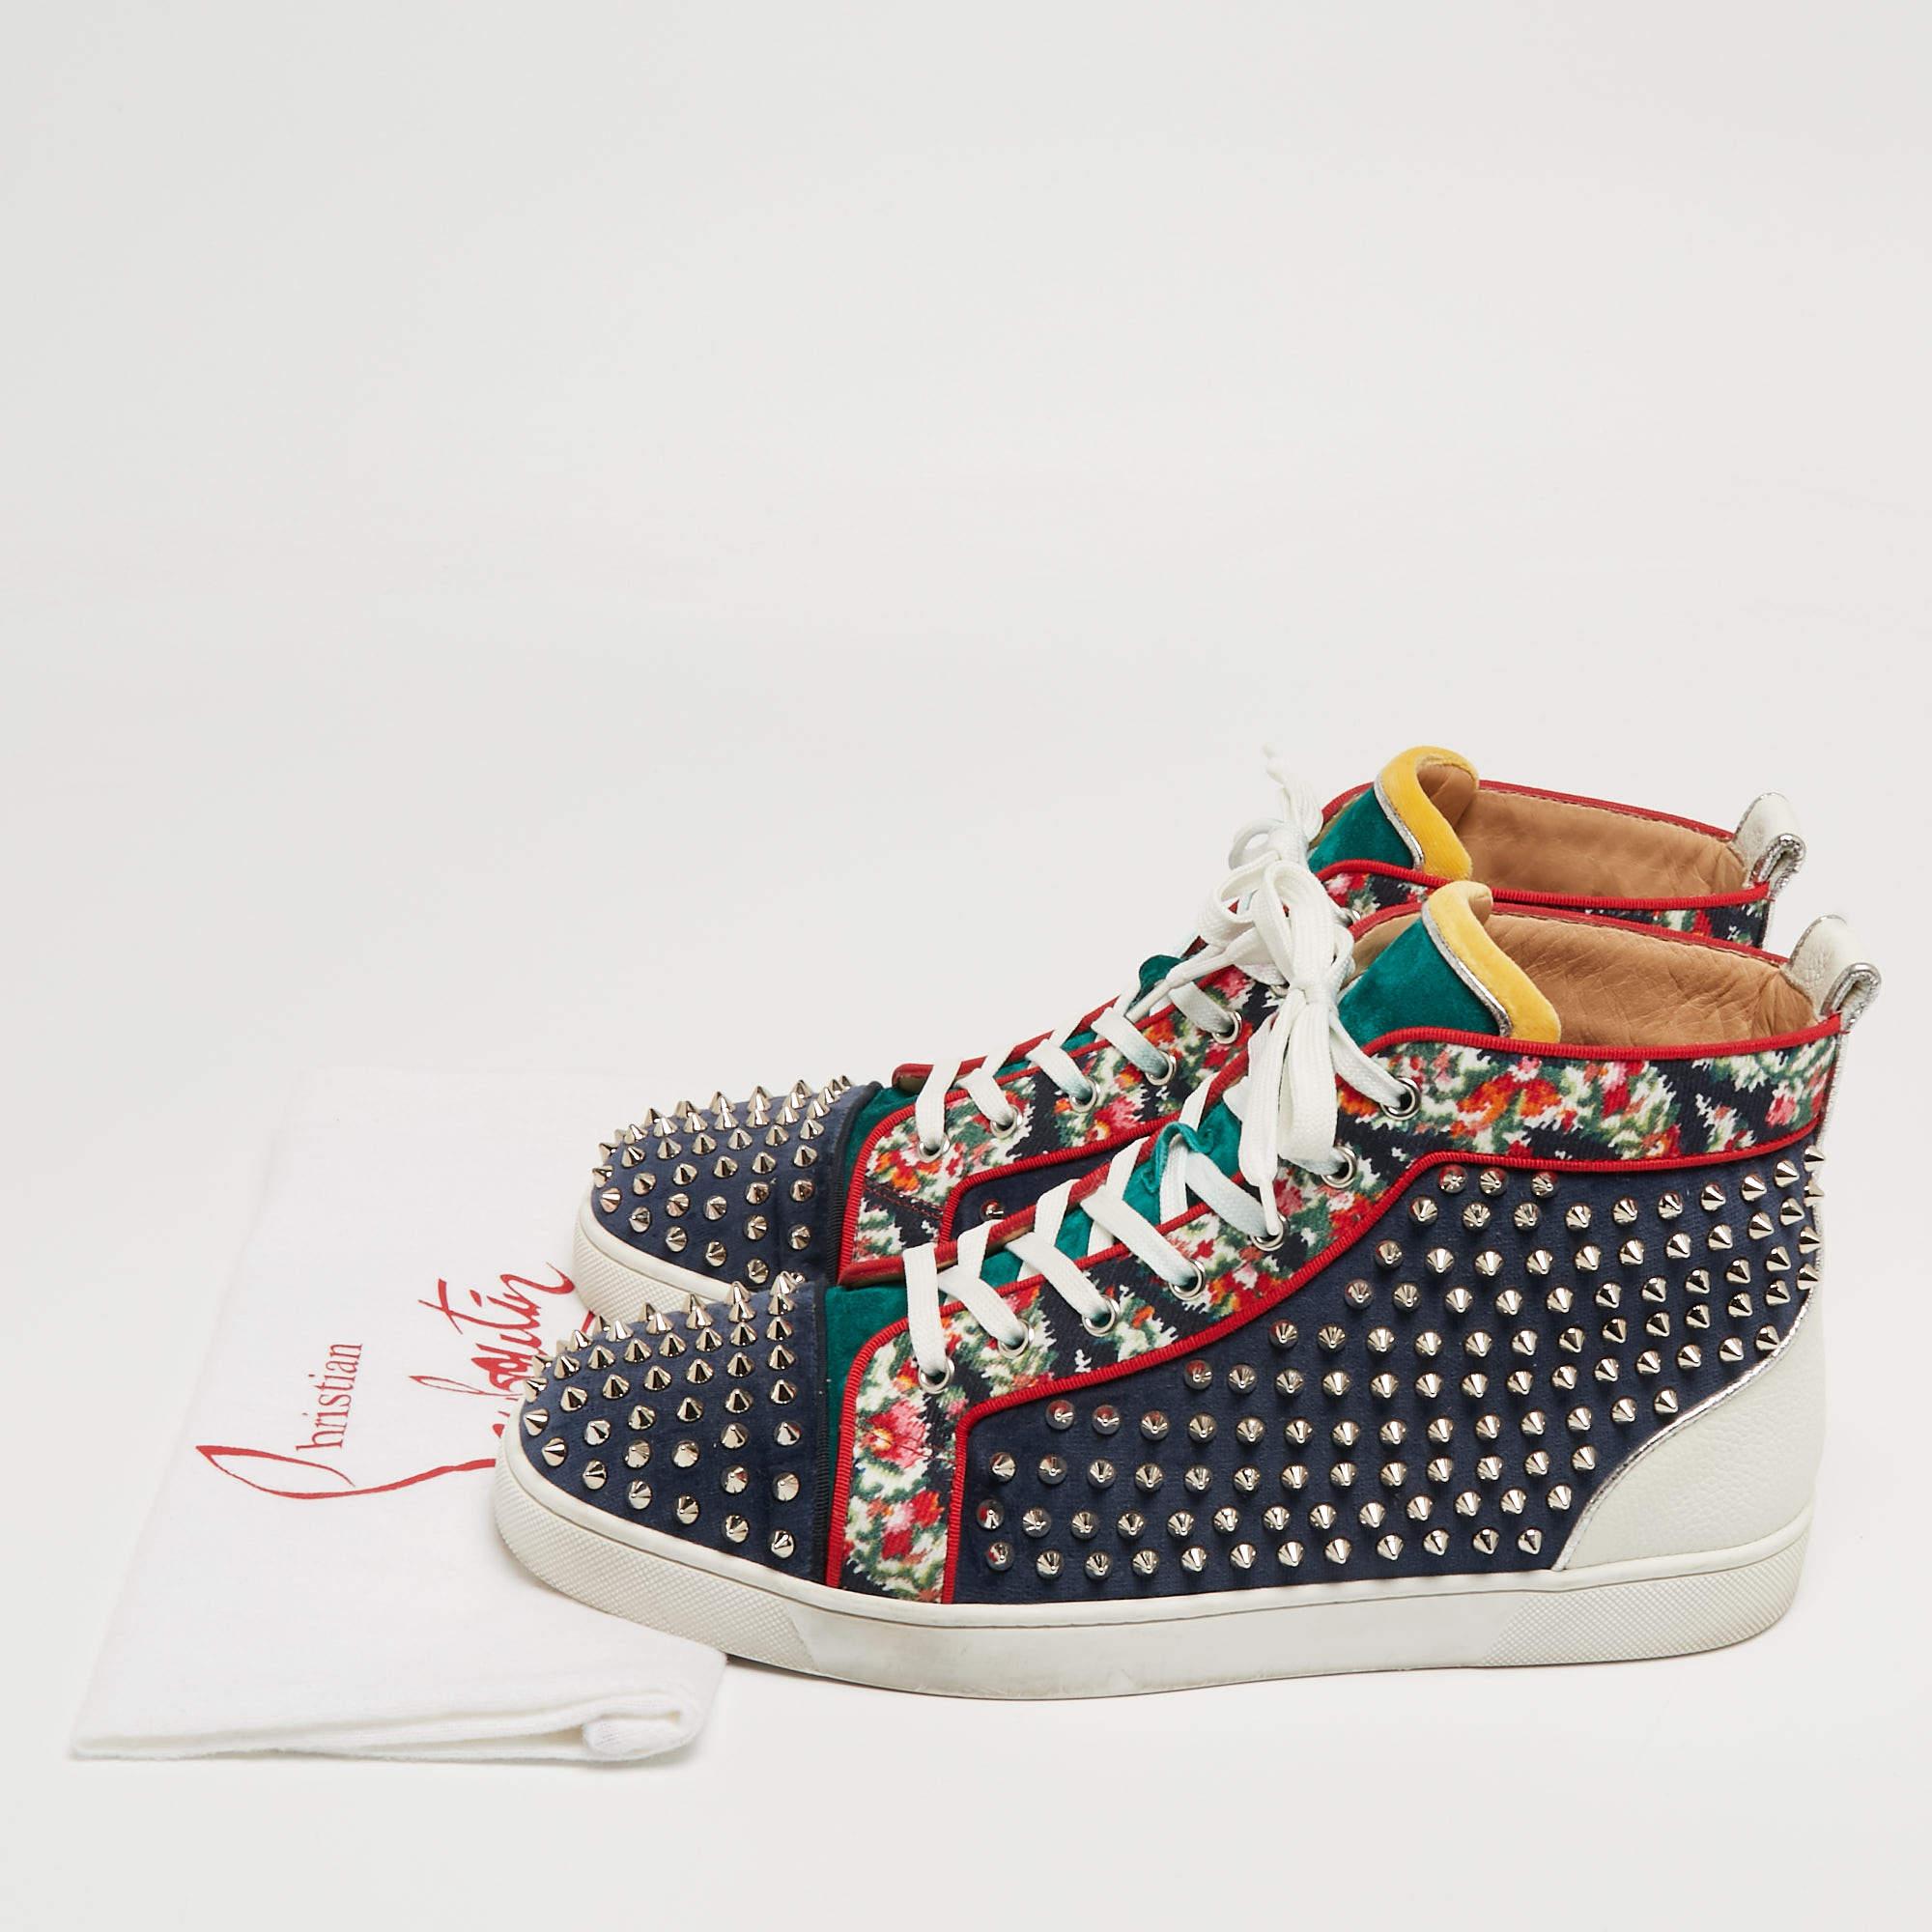 Christian Louboutin Tricolor Leather and Fabric Louis Spikes High-Top Sneakers S 5